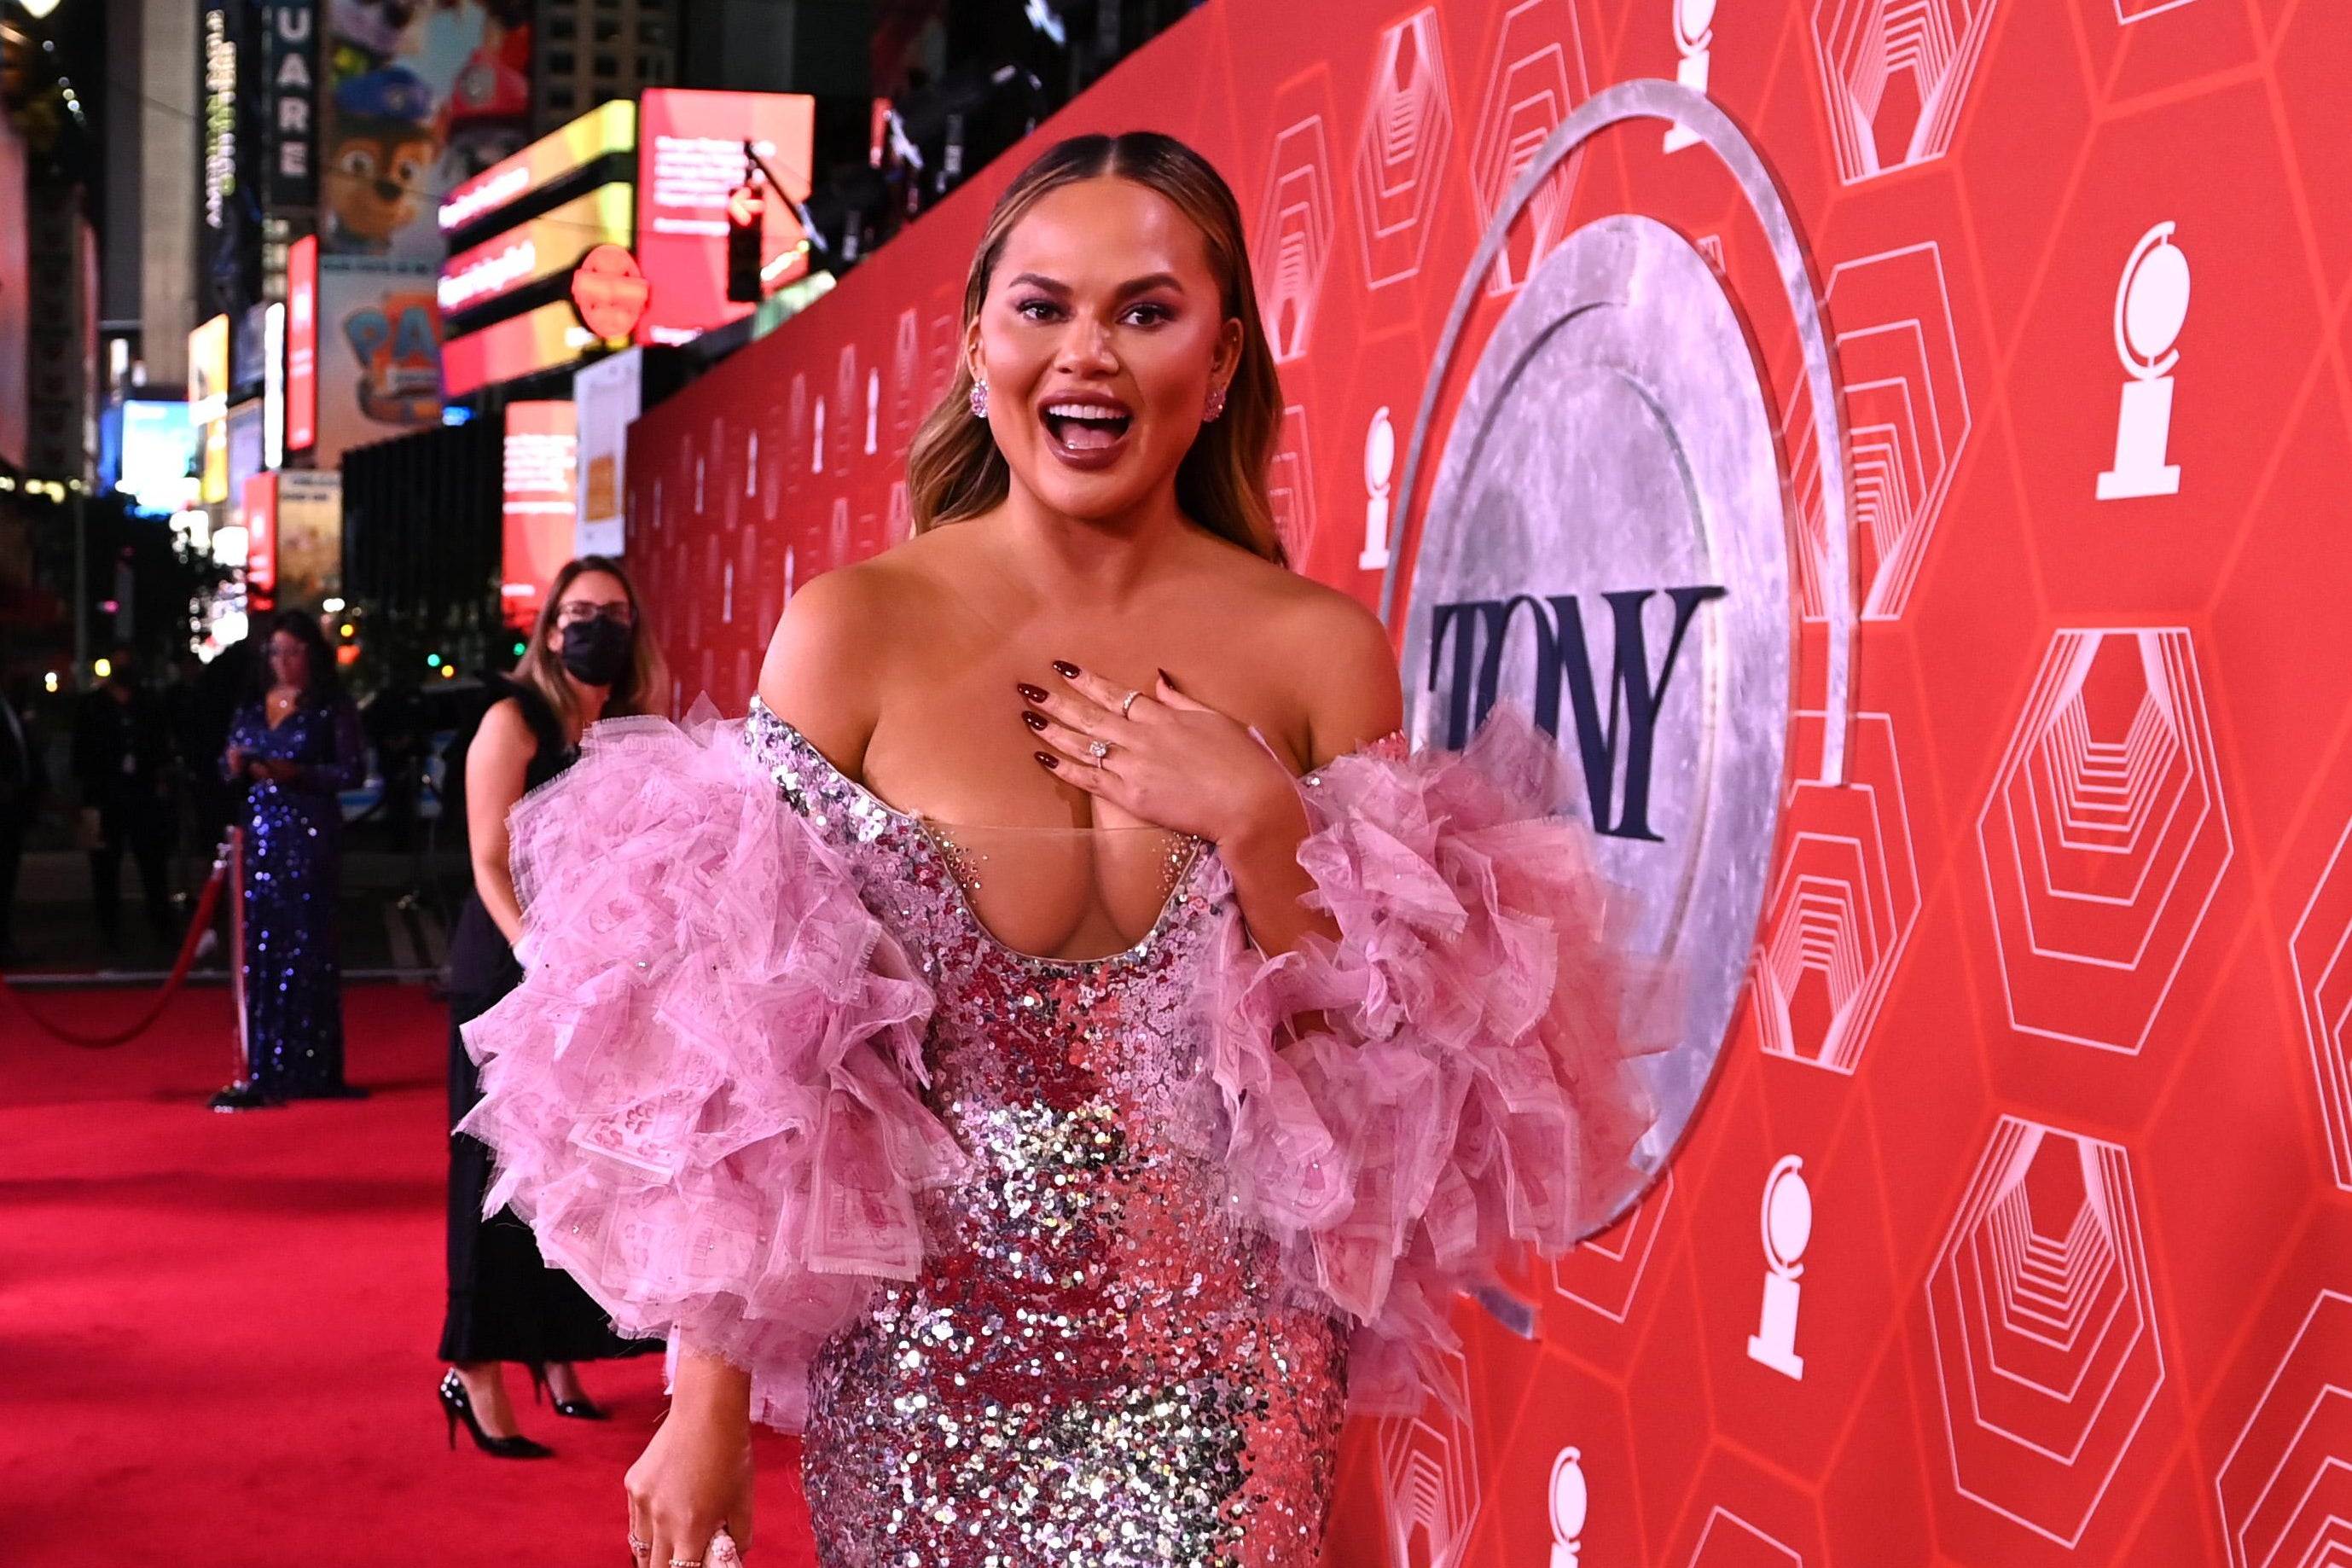 Chrissy Teigen on the red carpet in an off the shoulder silver sequin gown with pink ruffled sleeves. She is smiling and putting her left hand on her sternum as if to say "who, me?"